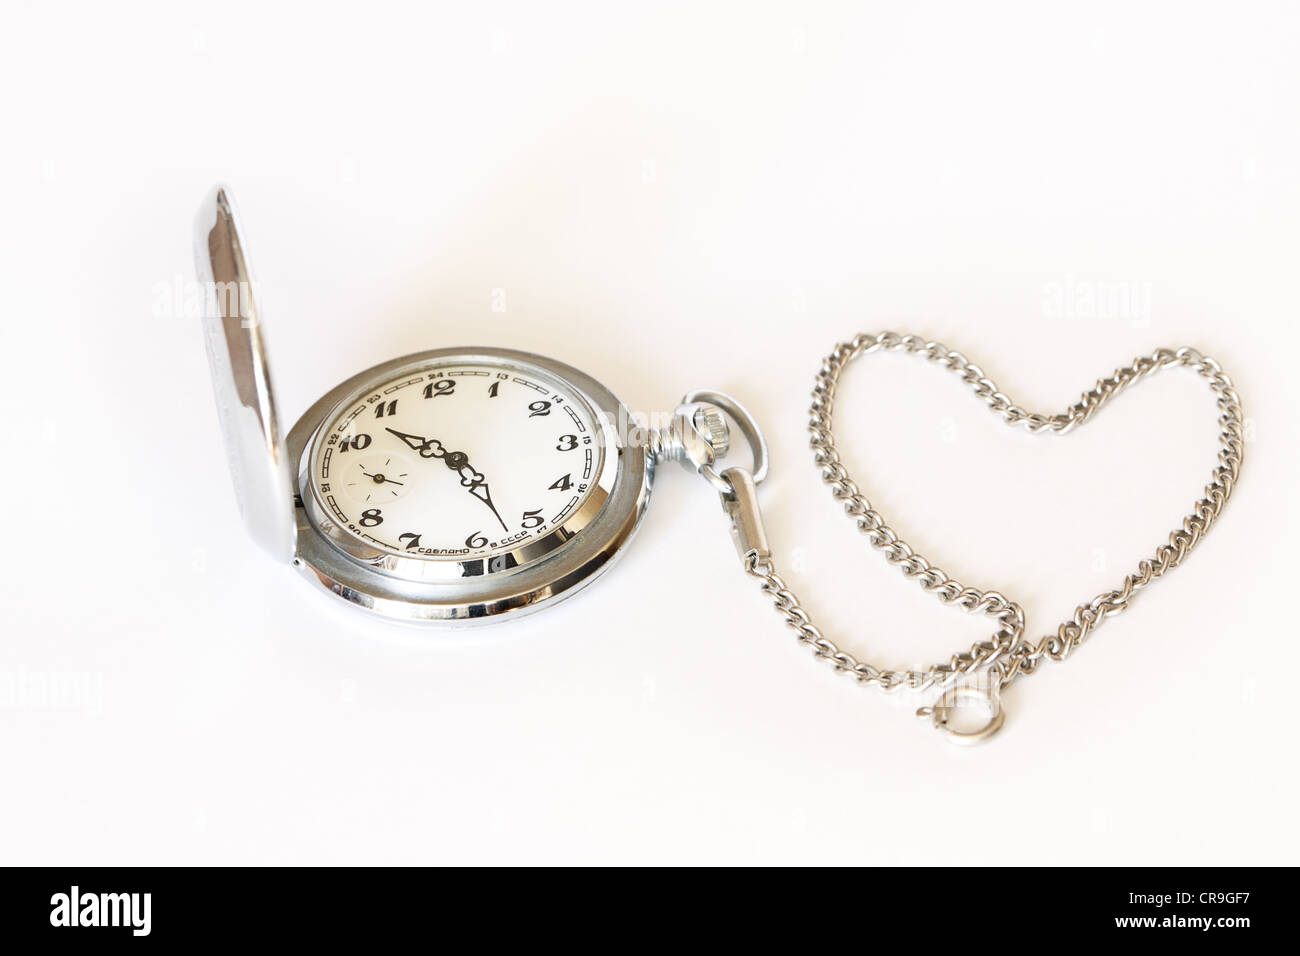 Pocket watch with chain in the form of a heard on white background Stock Photo